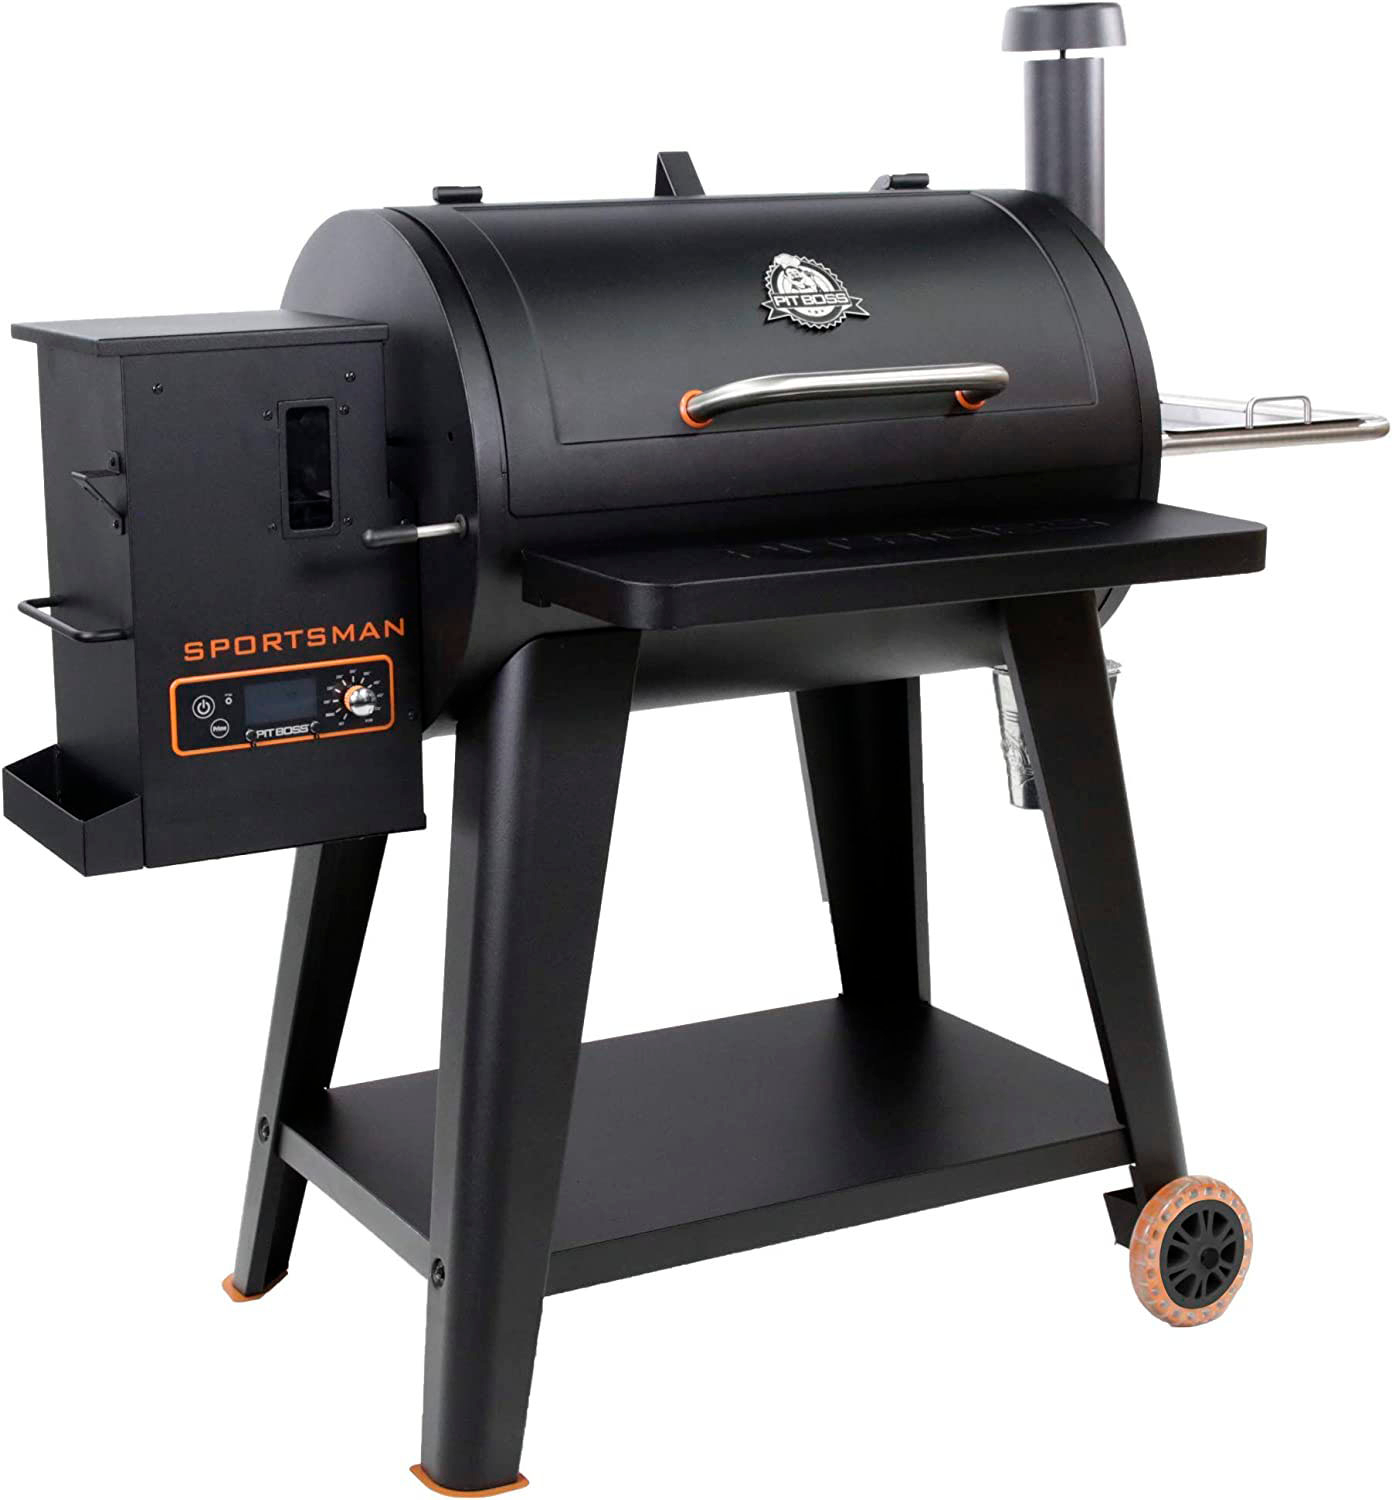 Pit Boss Sportsman 820 Review - Smoked BBQ Source